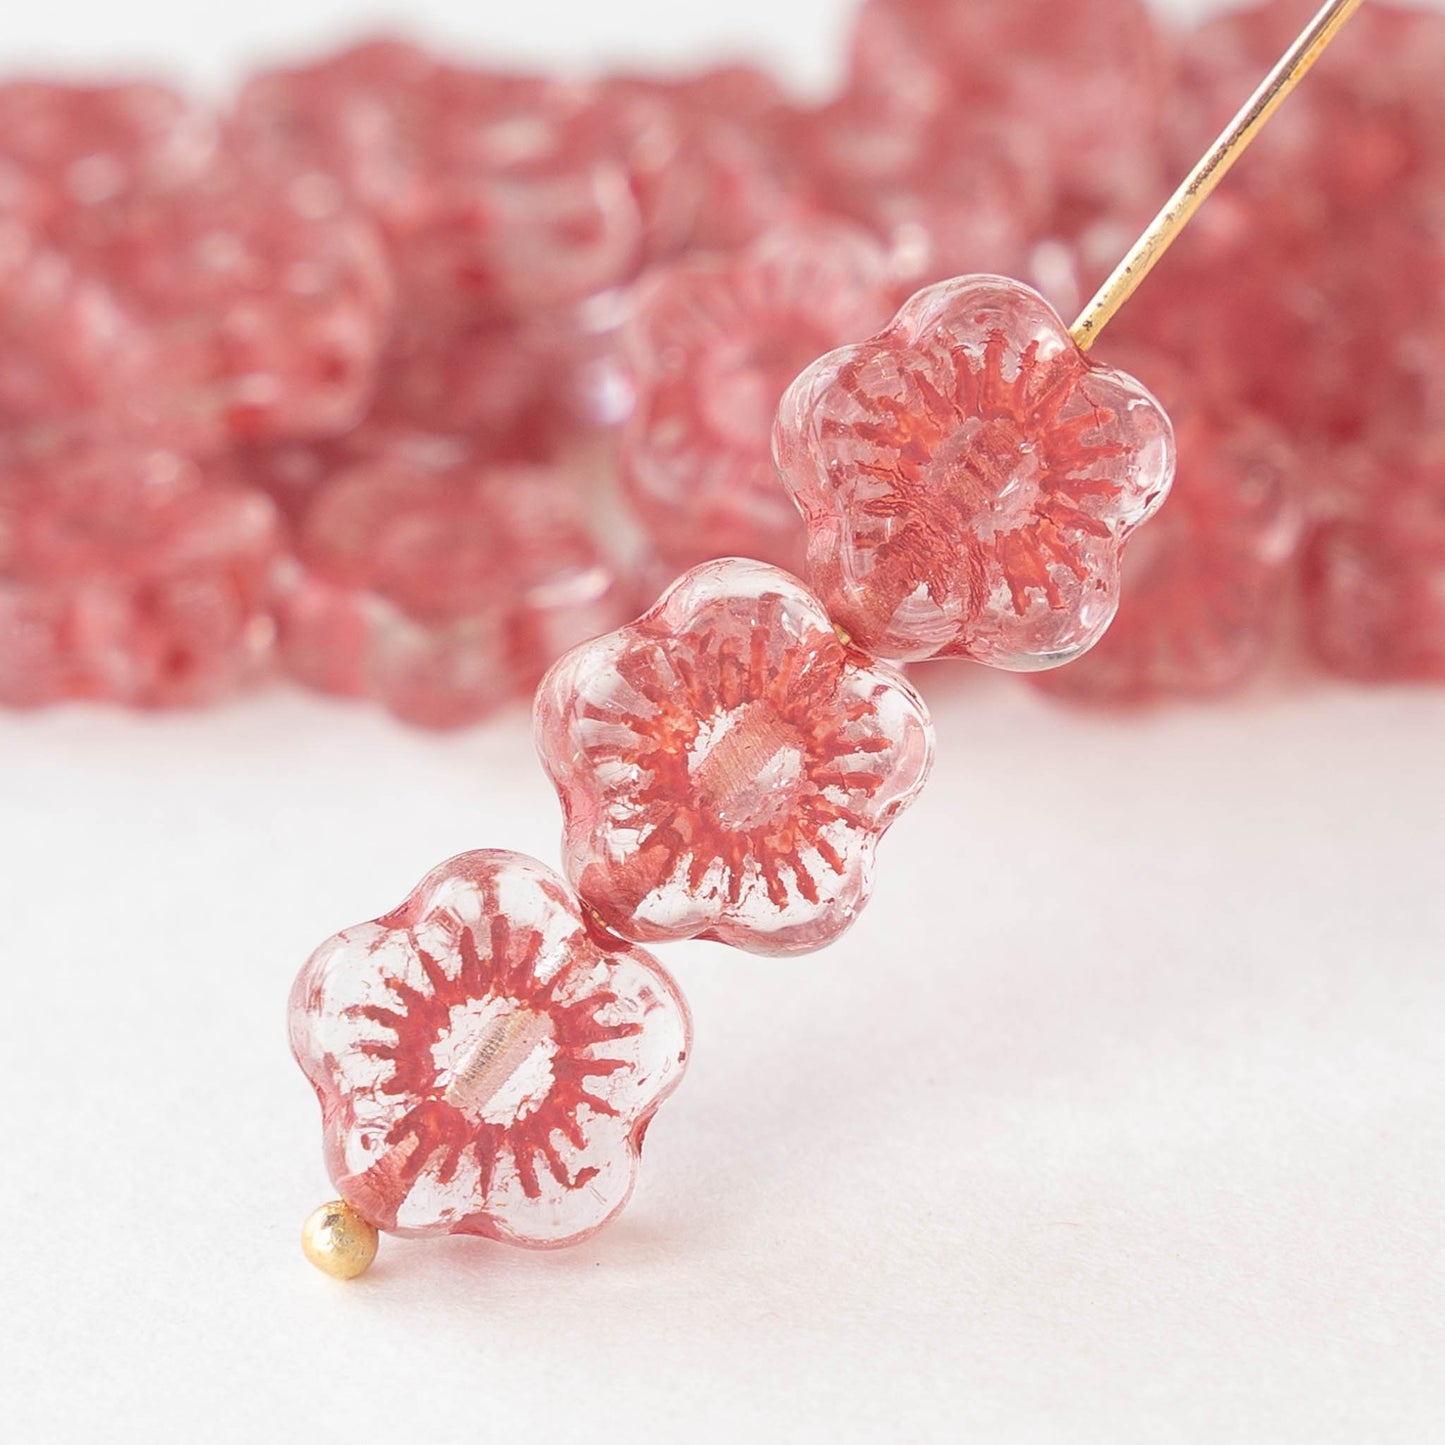 10mm Glass Flower Beads - Crystal with Pink Wash - 20 beads